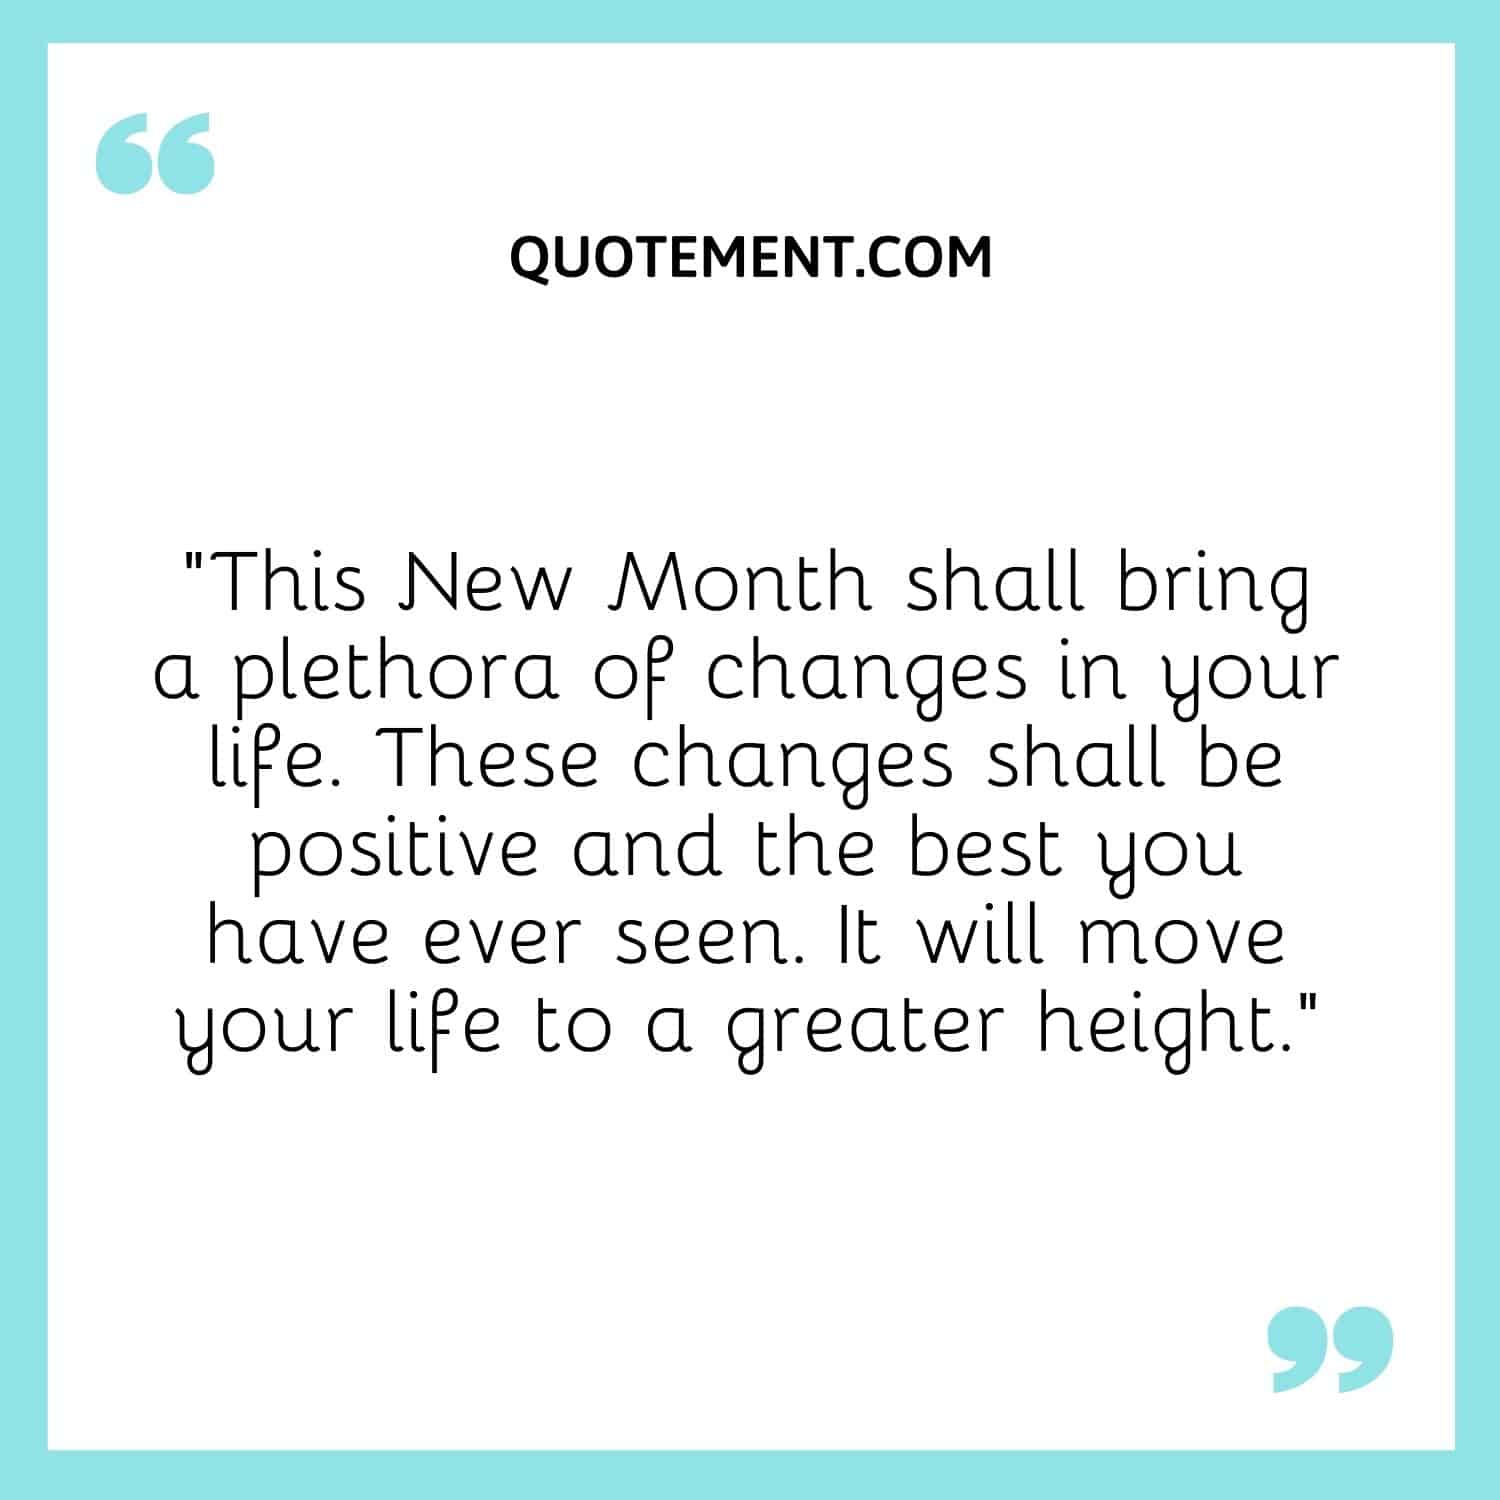 This New Month shall bring a plethora of changes in your life